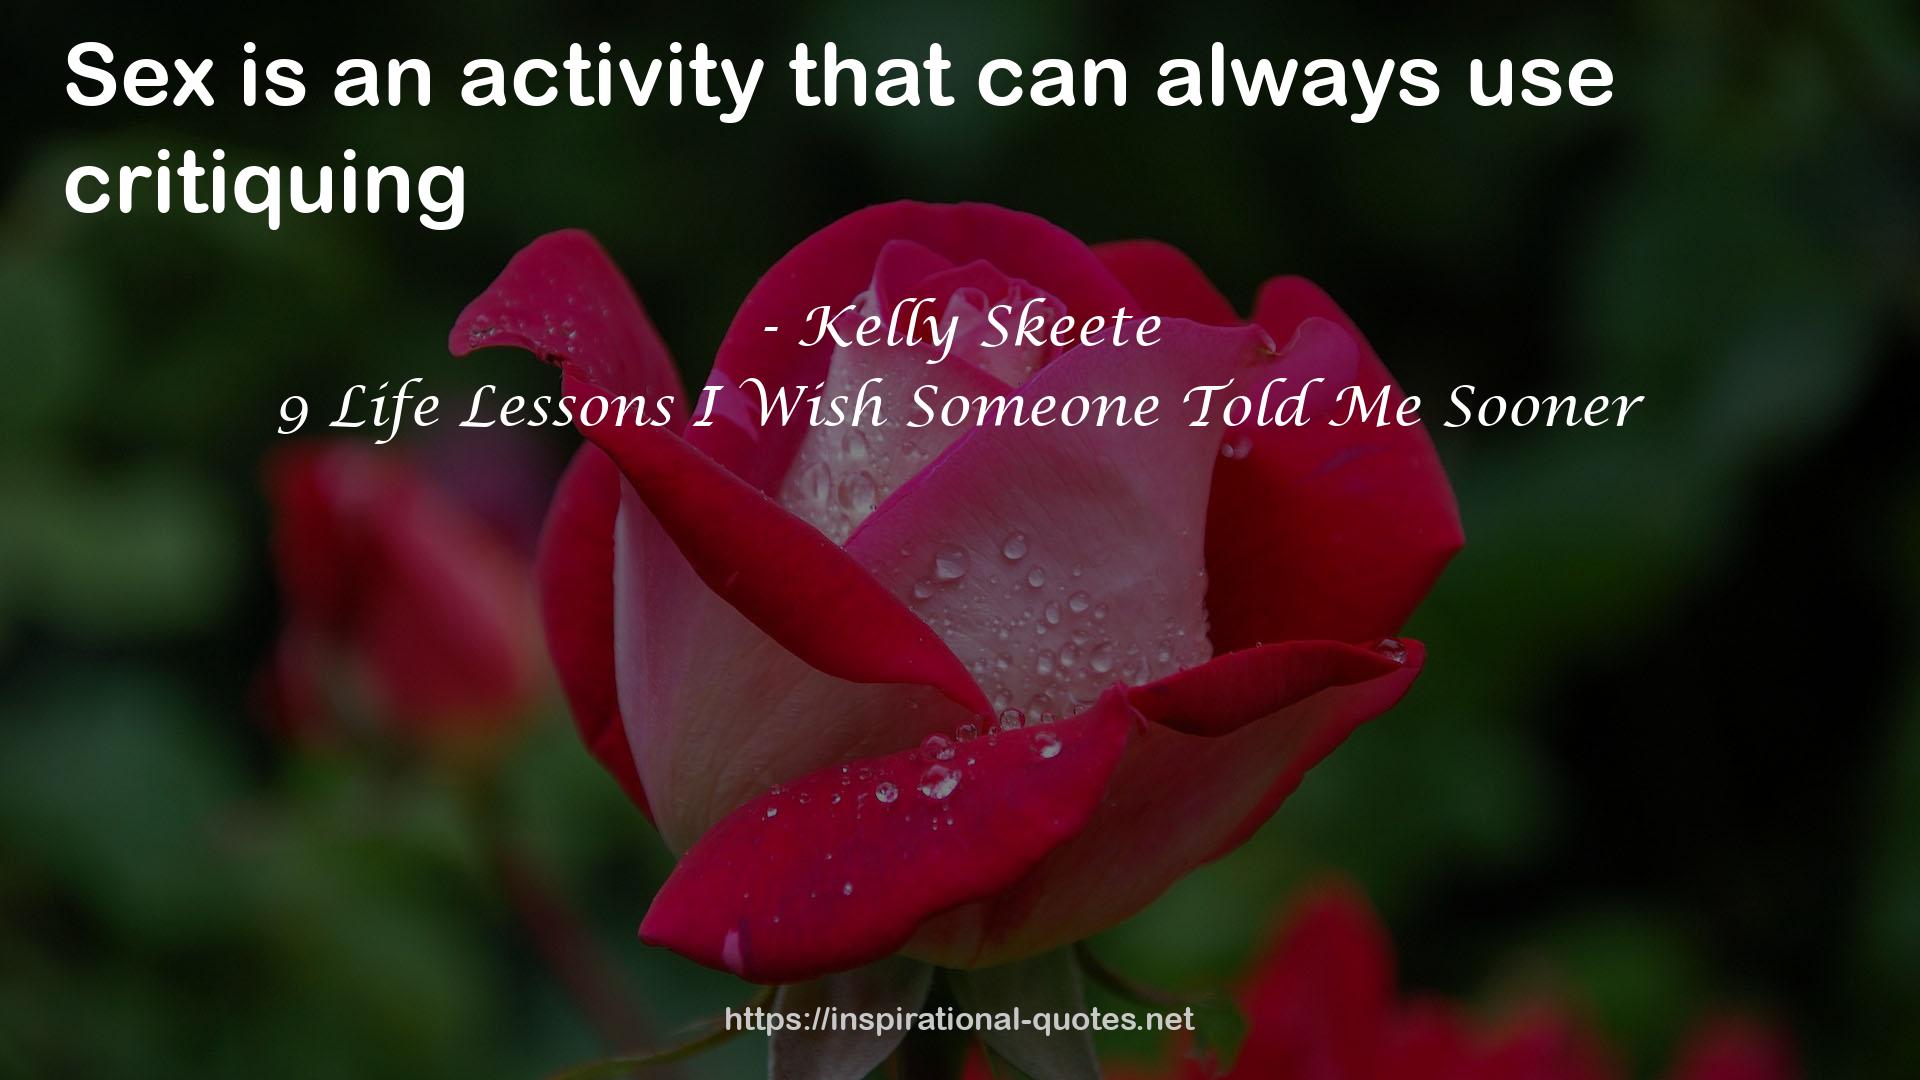 9 Life Lessons I Wish Someone Told Me Sooner QUOTES